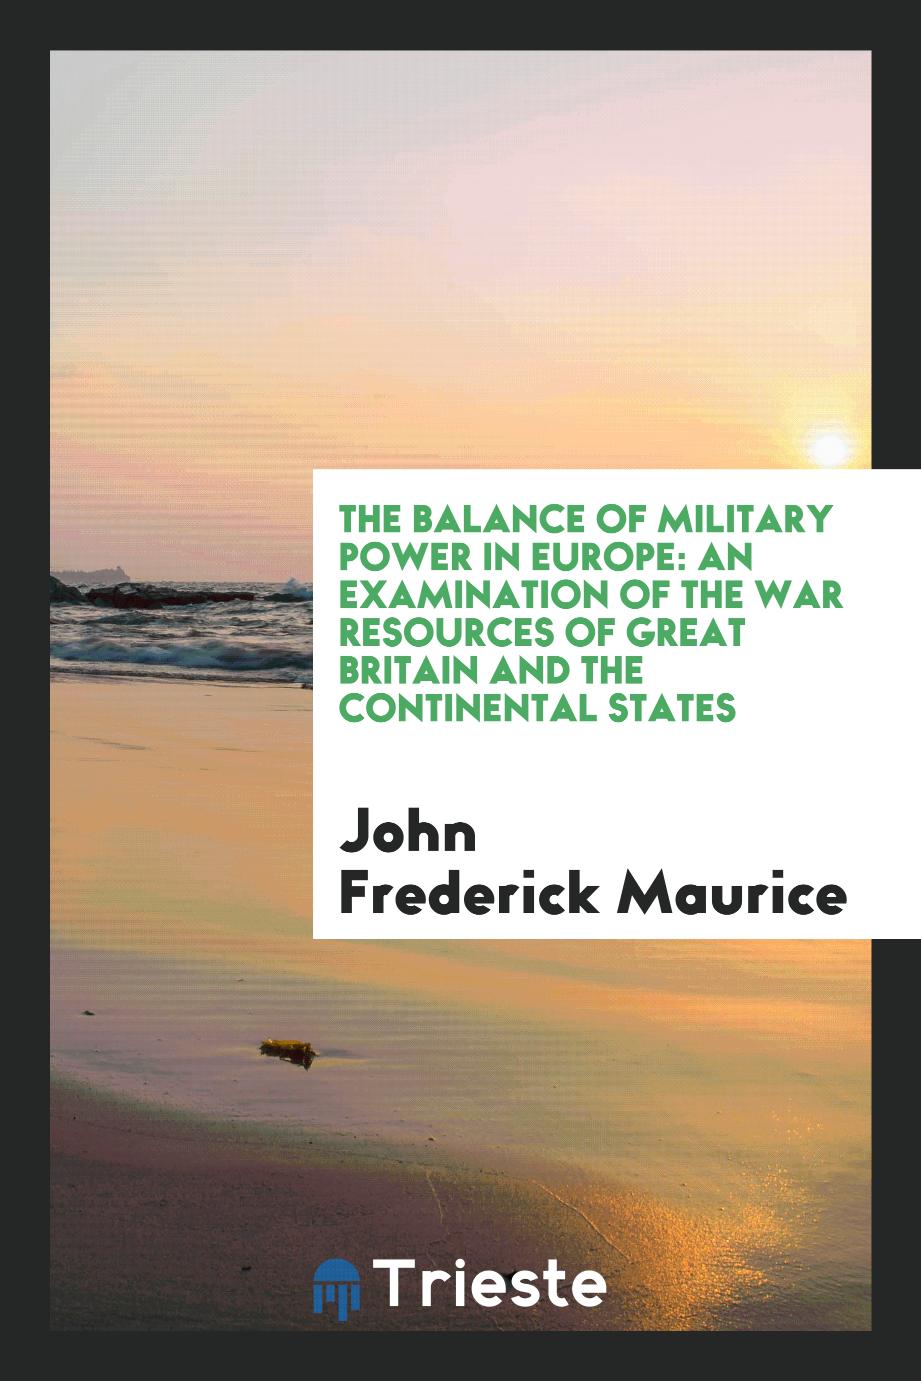 The balance of military power in Europe: an examination of the war resources of Great Britain and the continental states